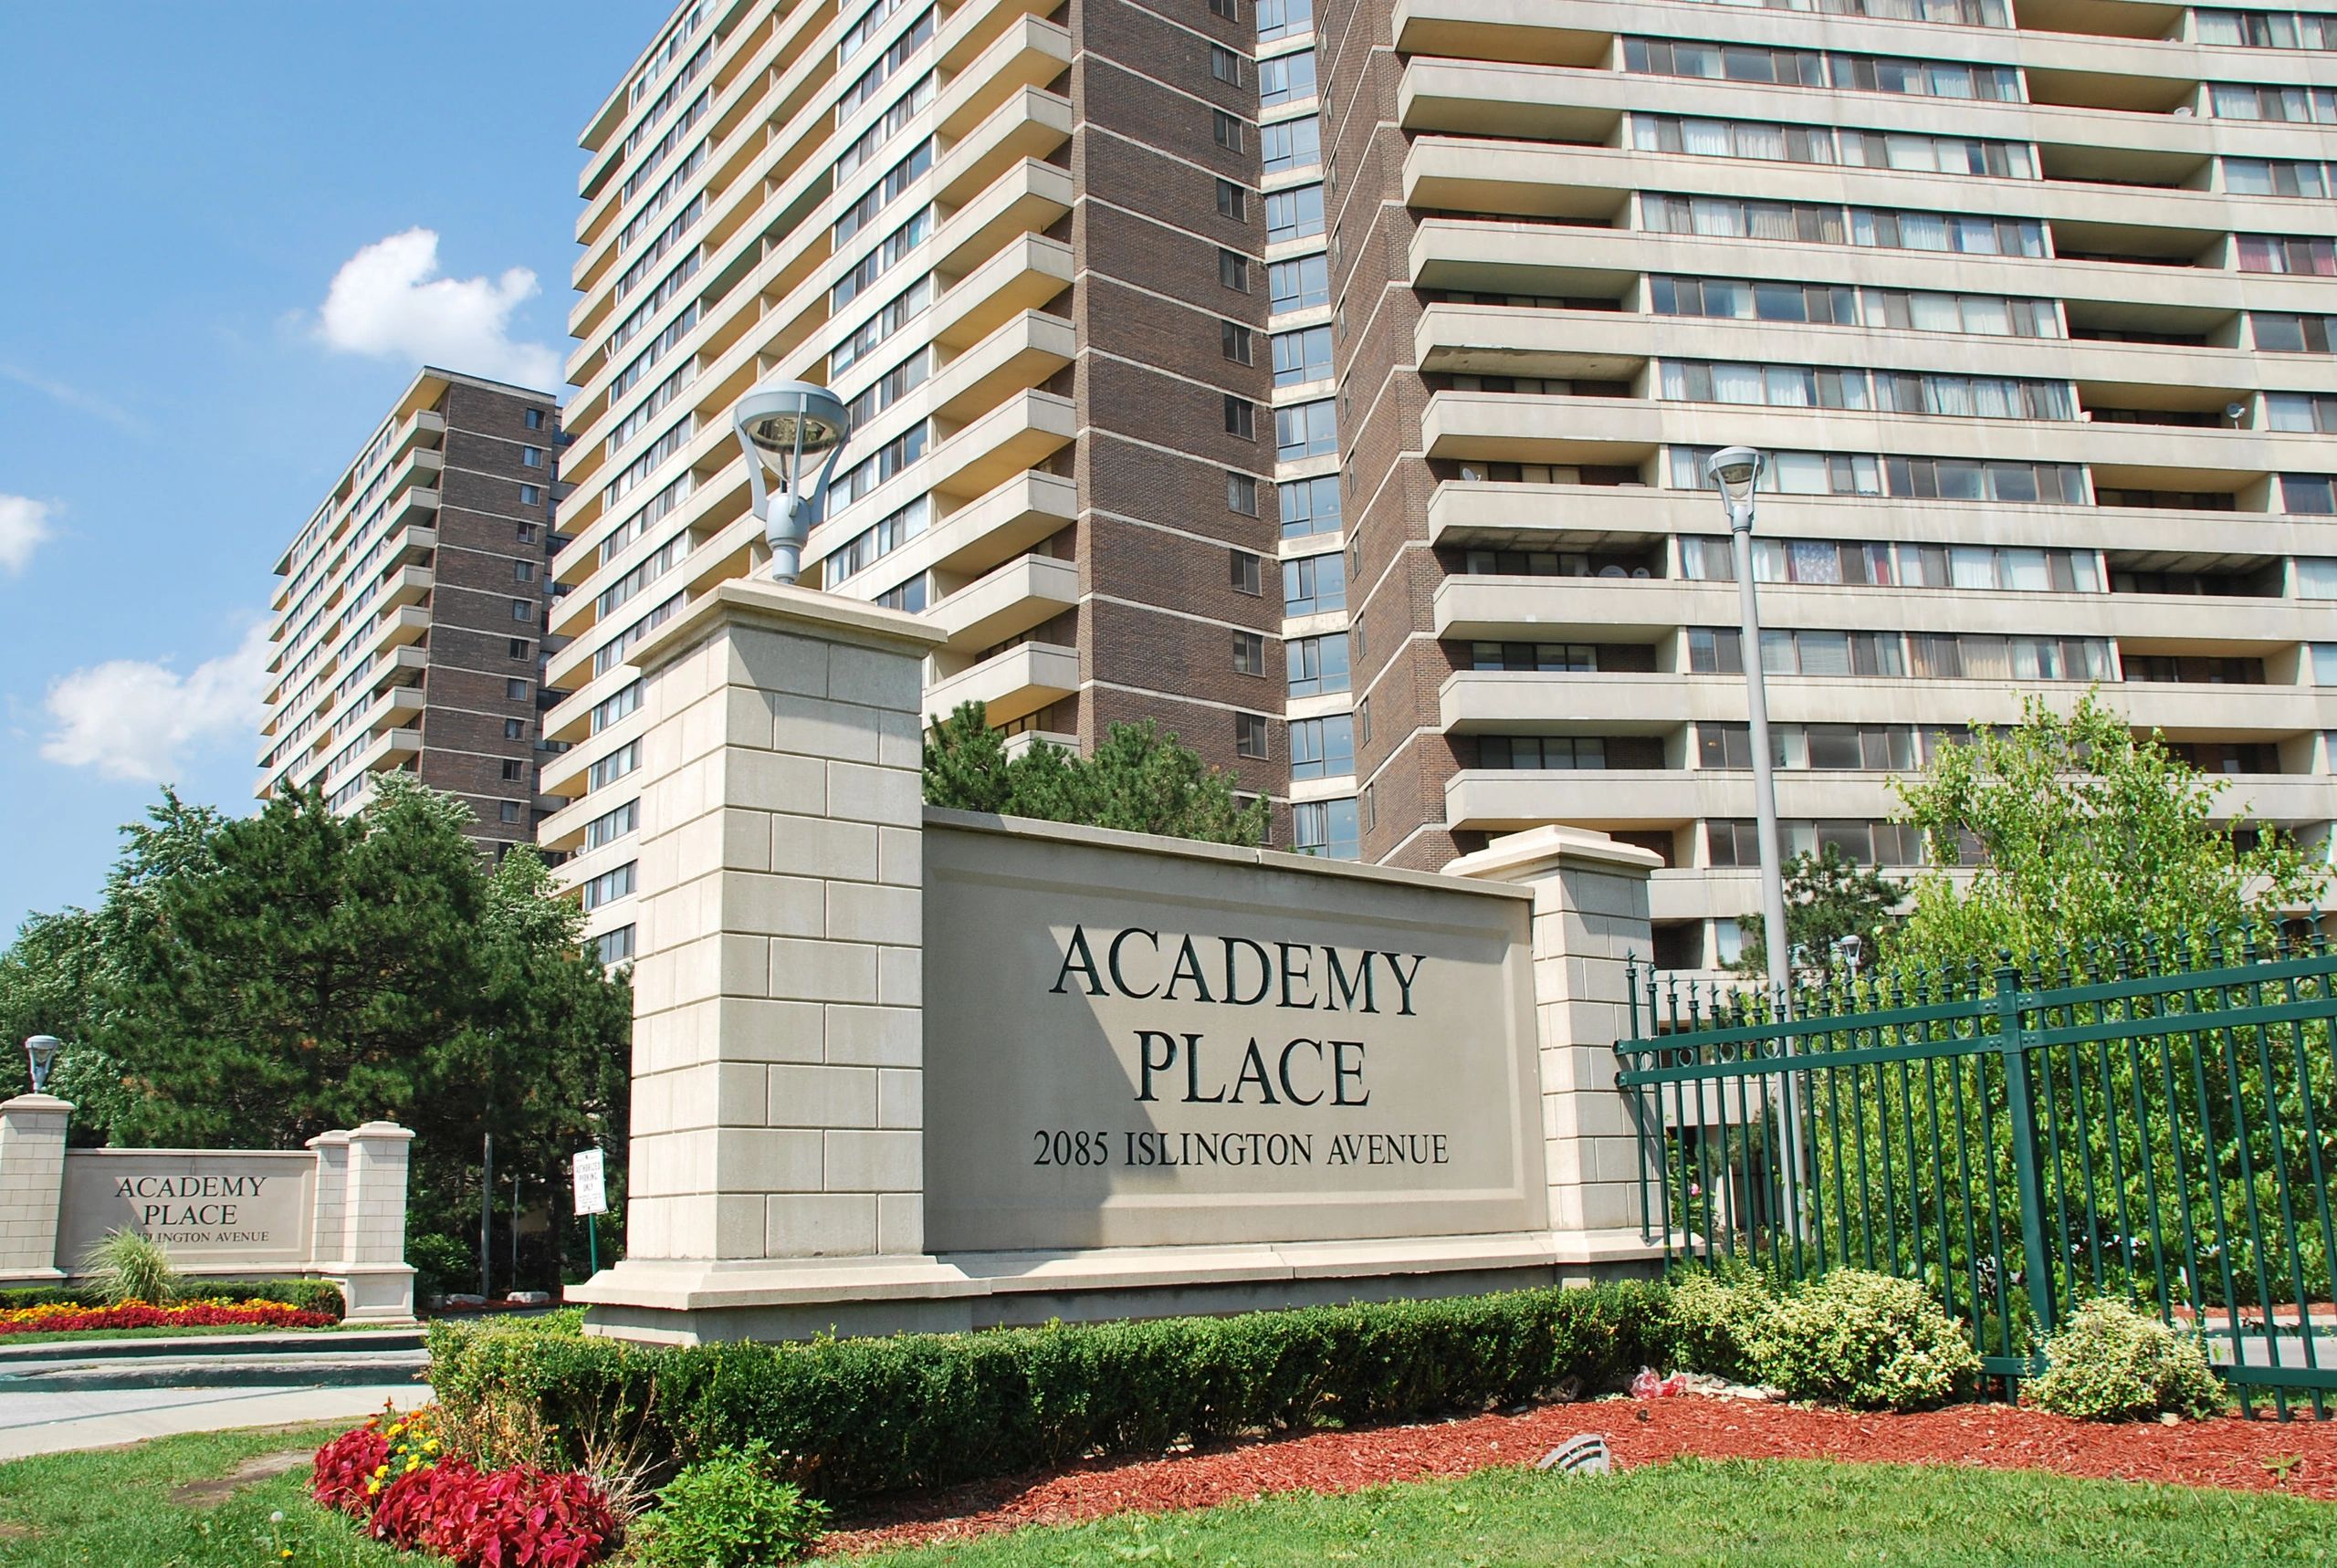 Academy Place